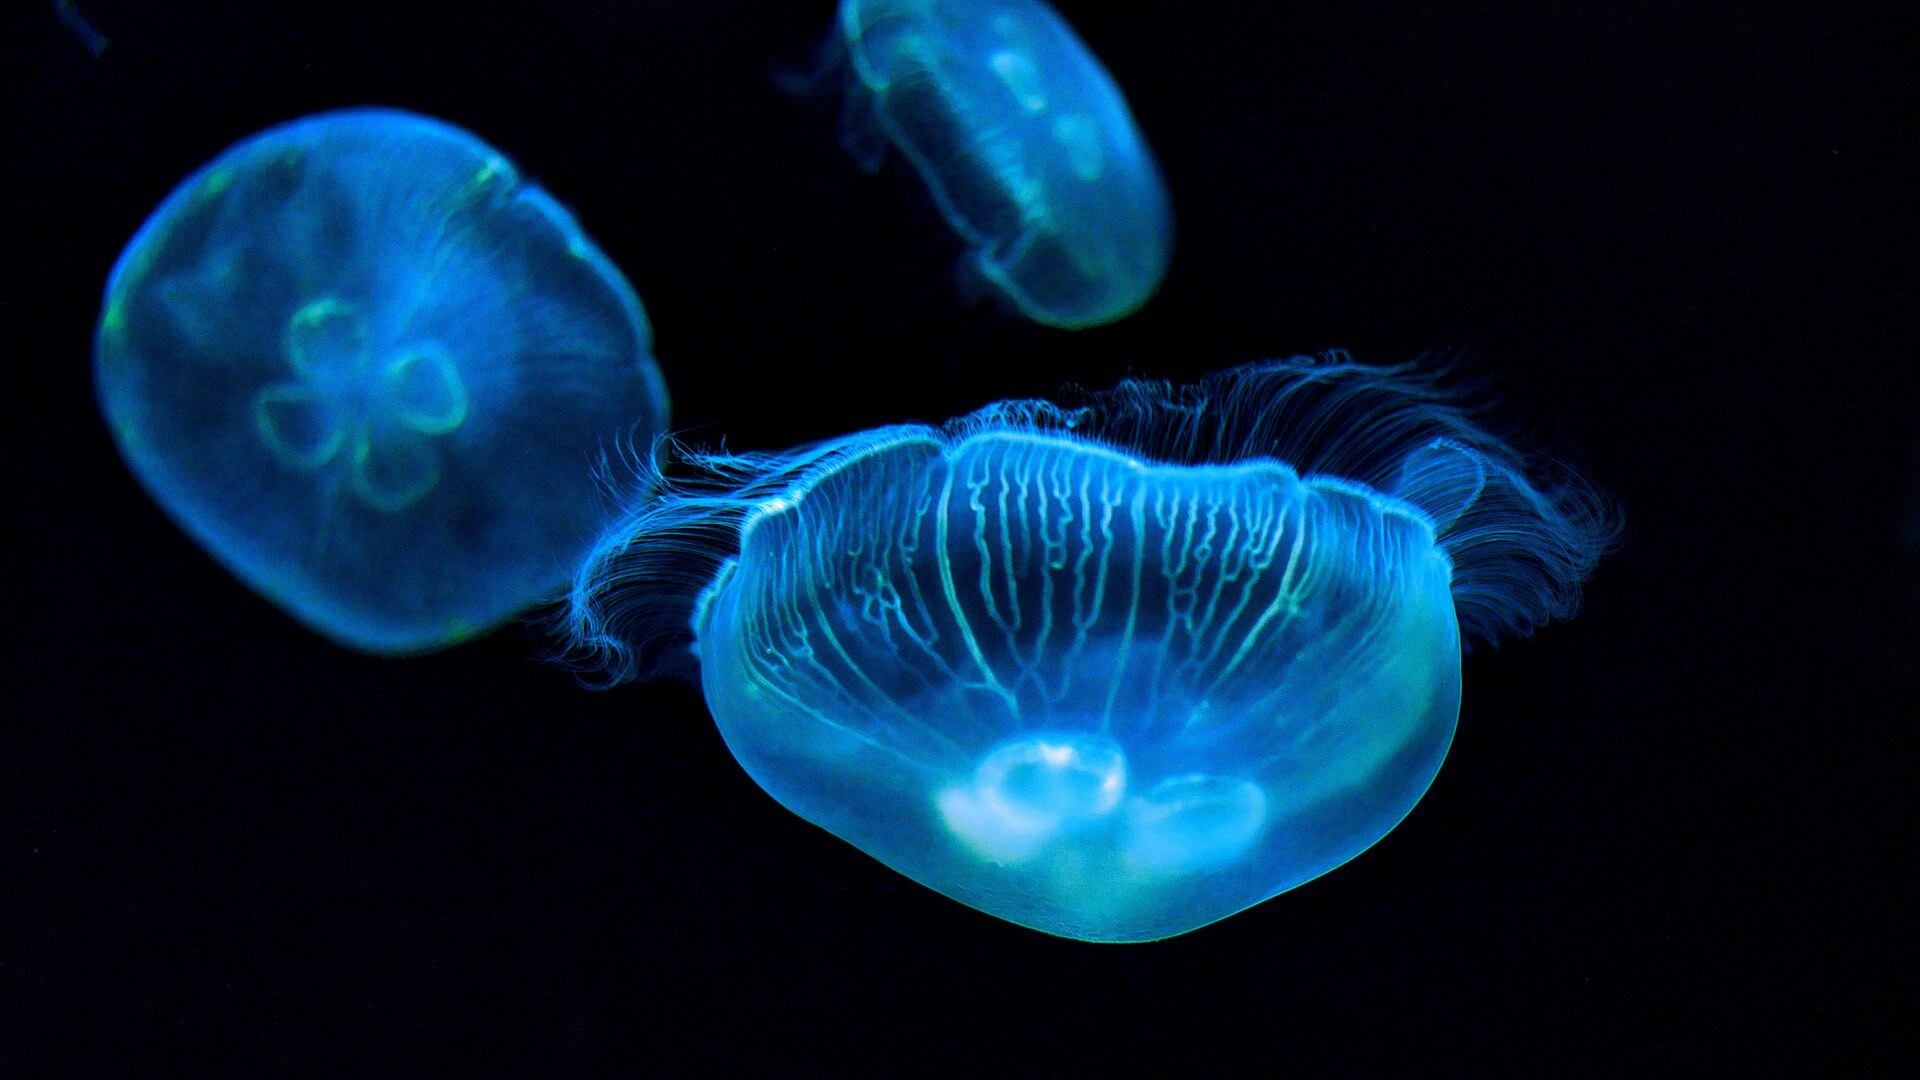 Glowing Jellyfish: Moon jelly, Relaxing free flowing movement, Four bright gonads under the stomach. 1920x1080 Full HD Wallpaper.